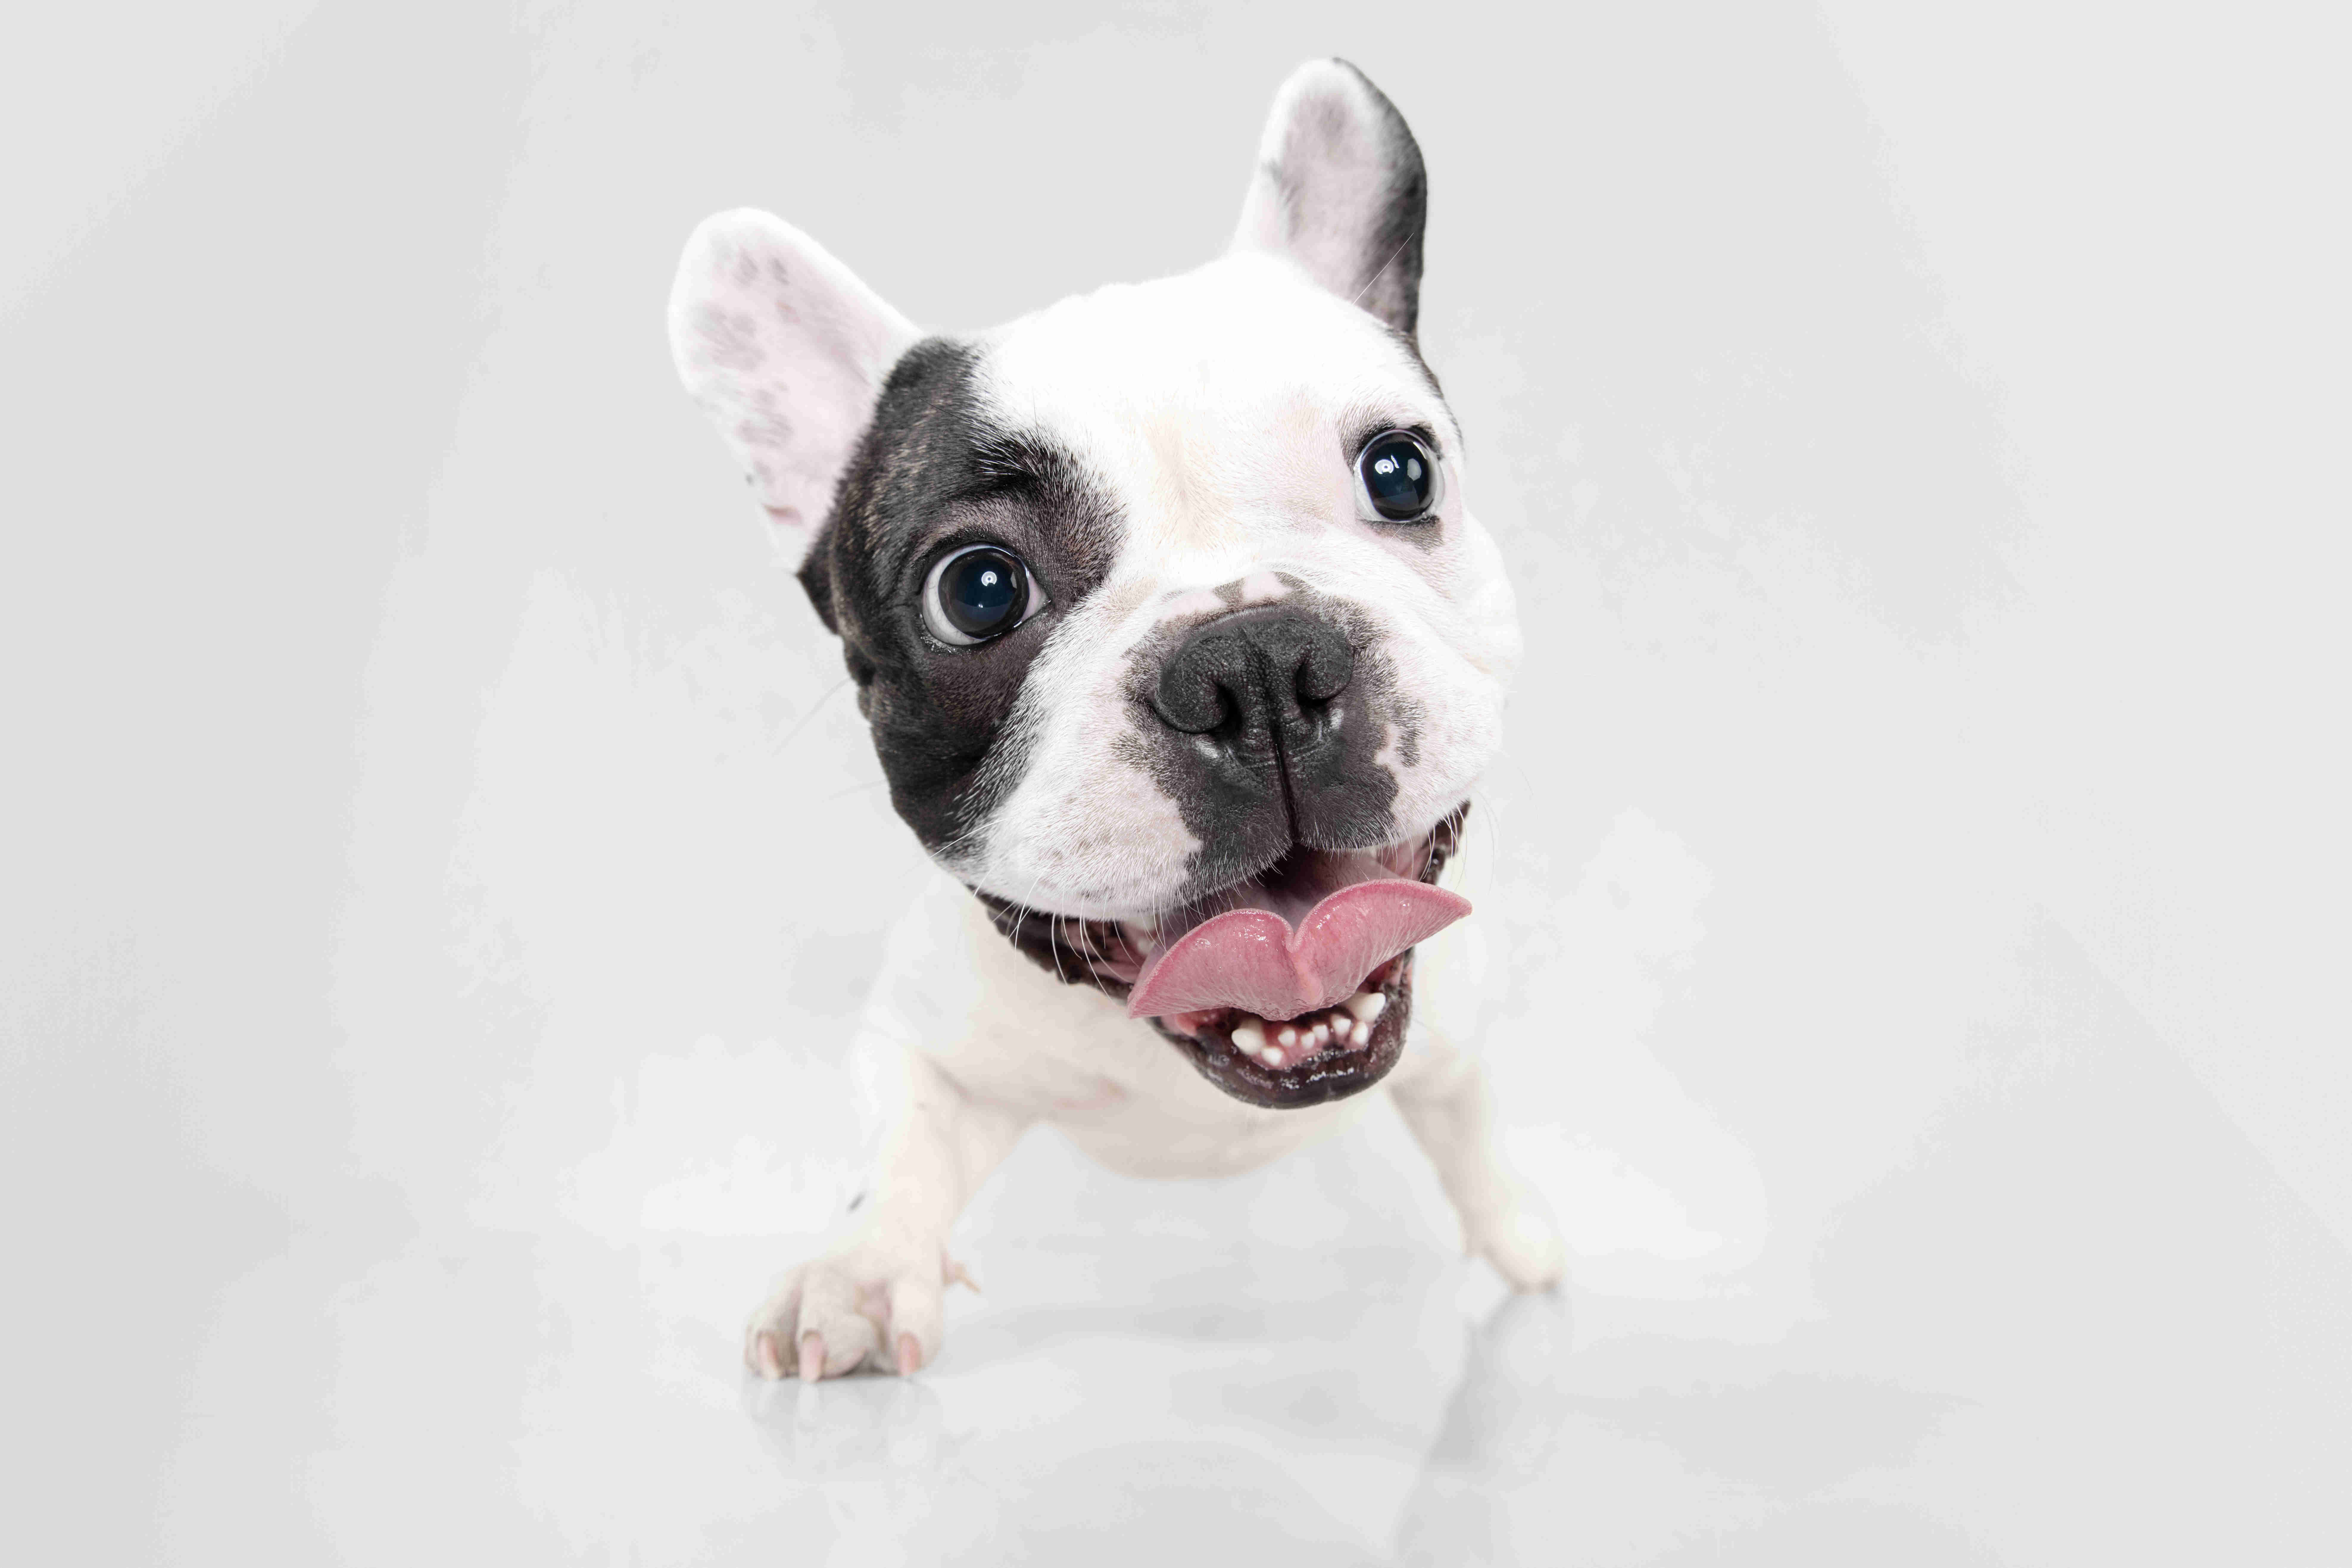 French Bulldogs: The Perfect Companion for Seniors and Those with Limited Mobility?